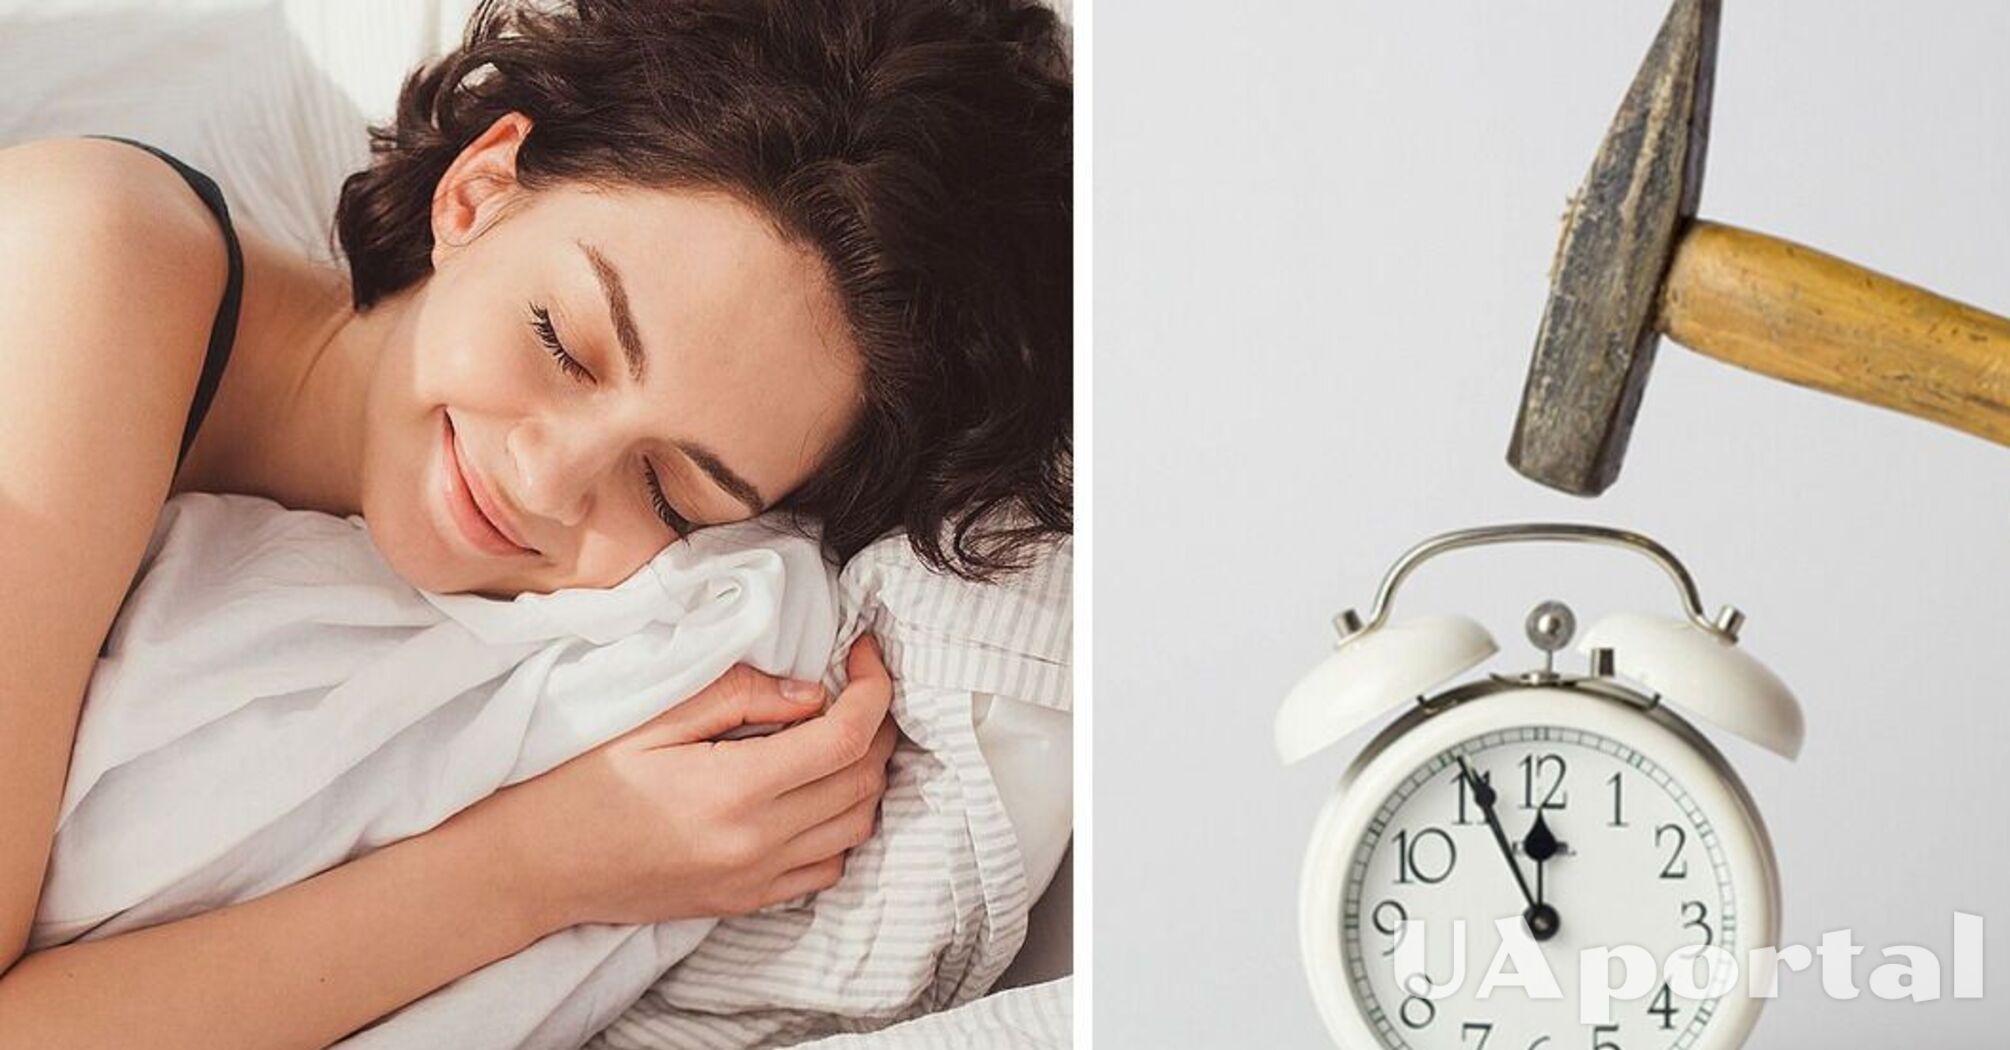 Why it is harmful to set the alarm on repeat: the consequences will be unpleasant